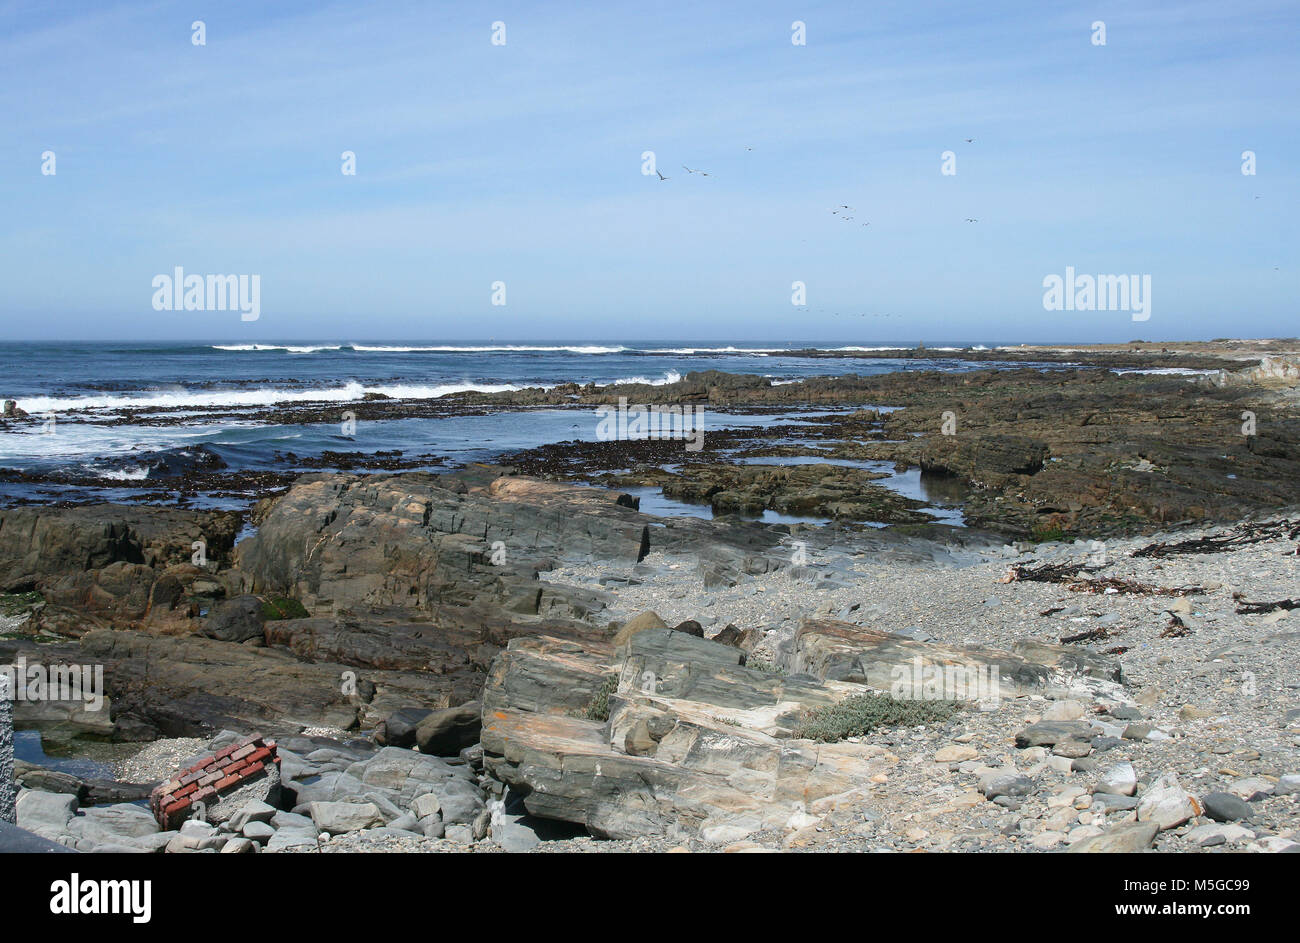 View of the rocky coastline of Robben Island, Cape Town, South Africa Stock Photo